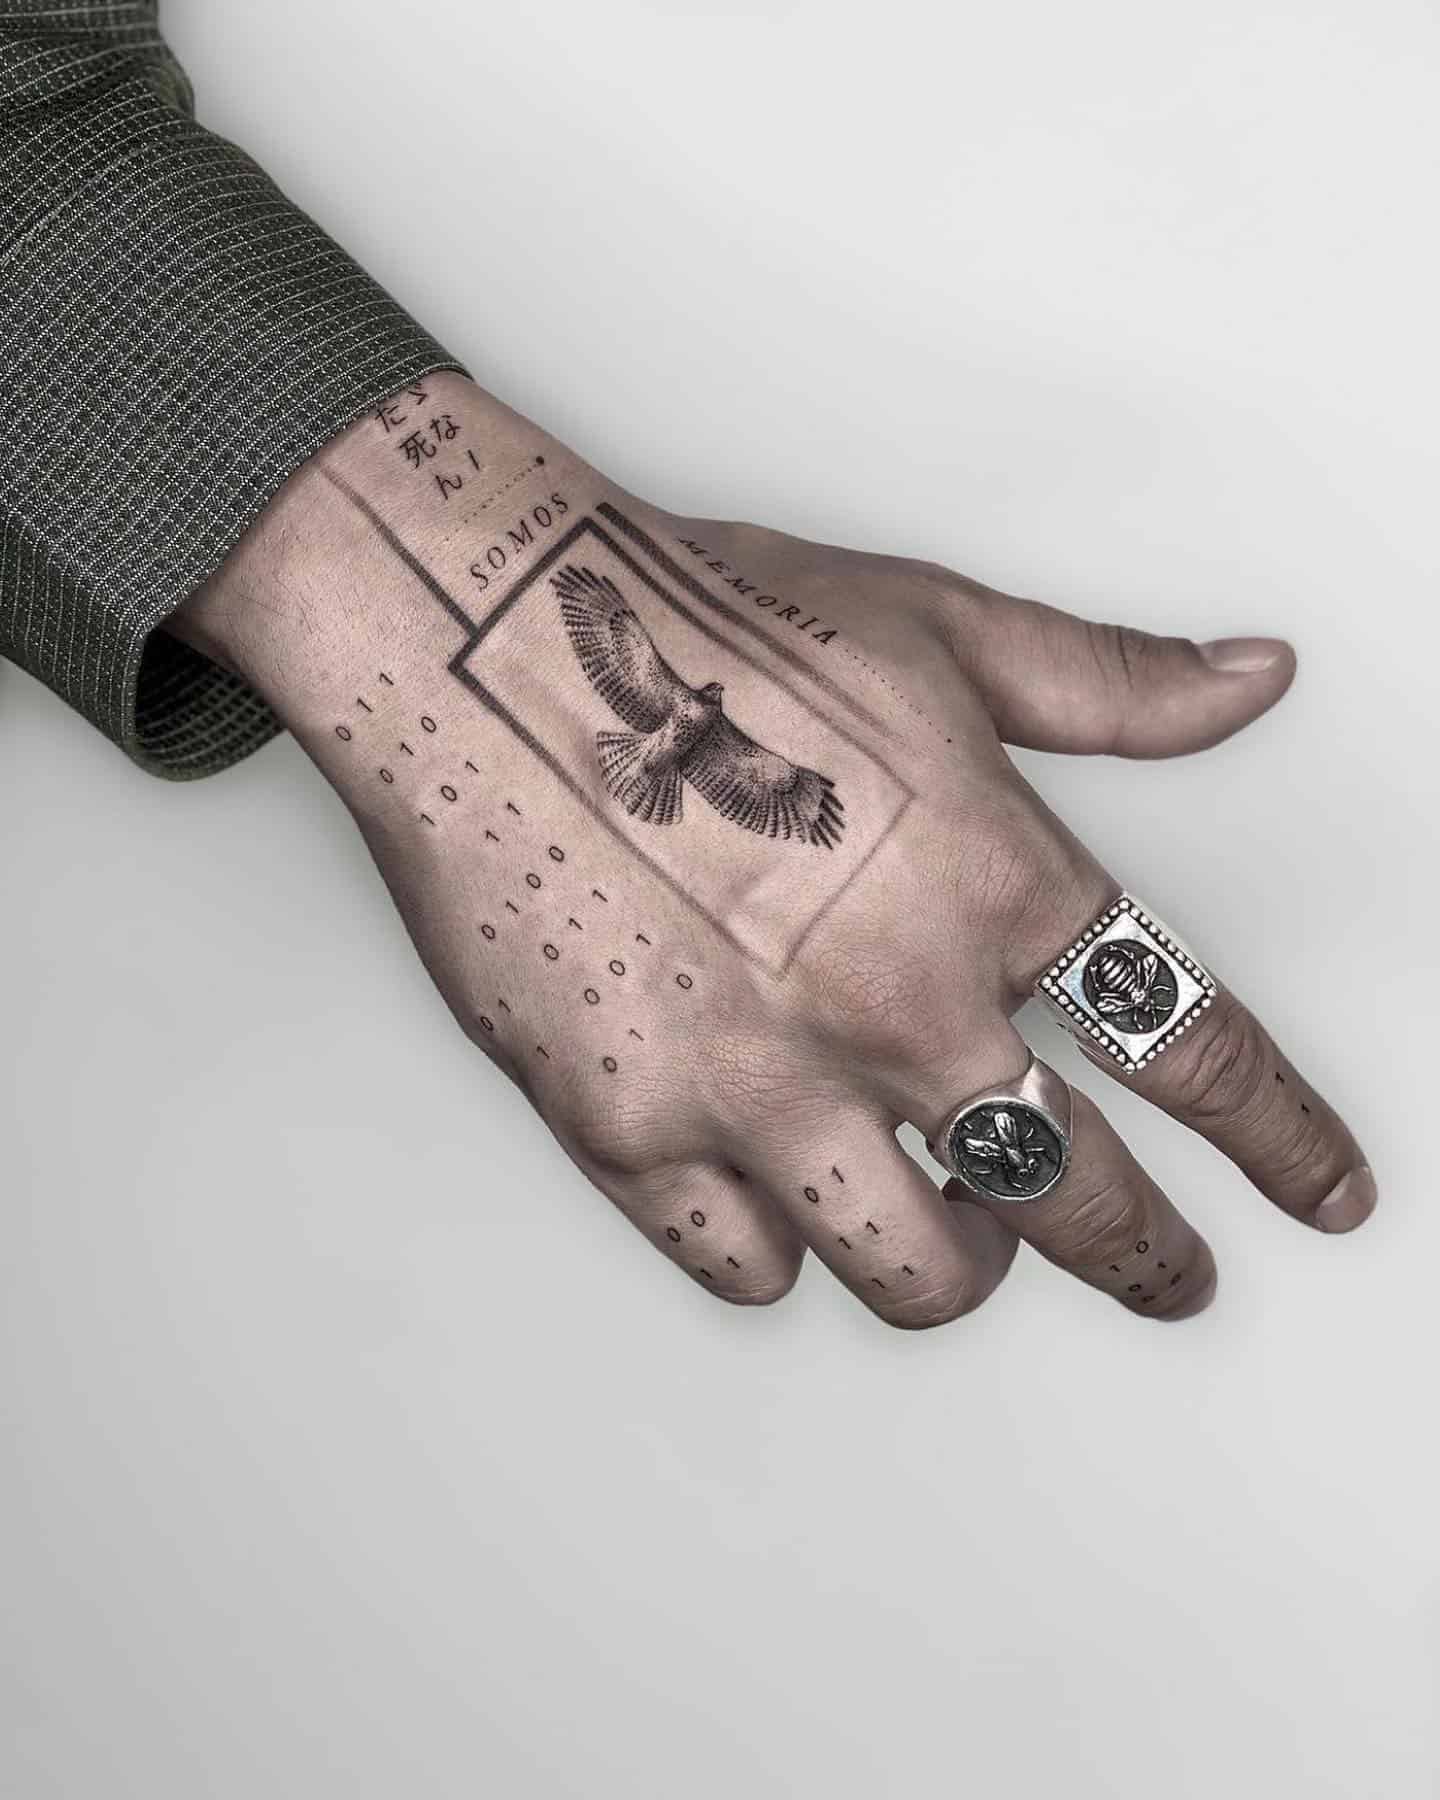 Clean hand tattoos for men